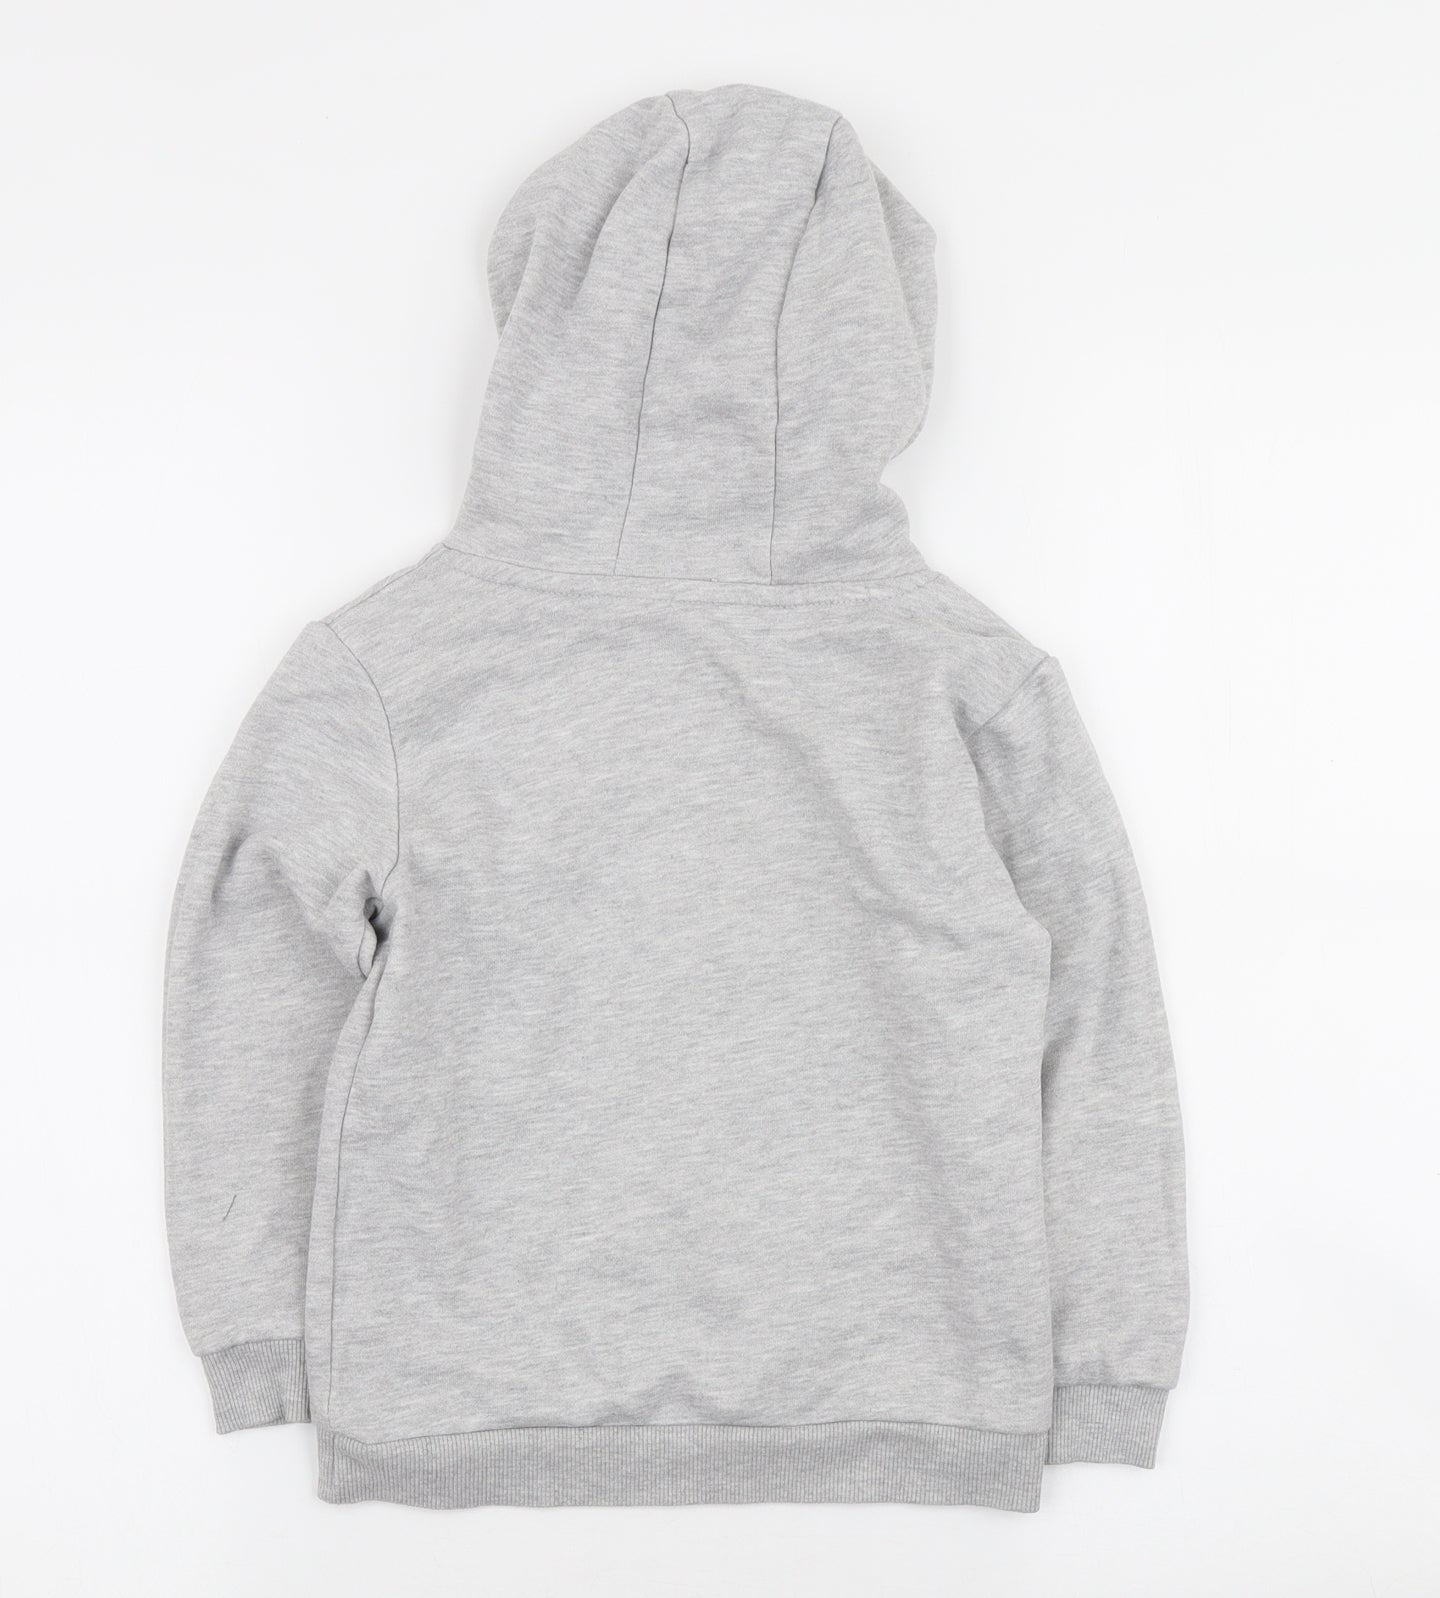 Dunnes Stores Boys Grey Cotton Pullover Hoodie Size 5-6 Years